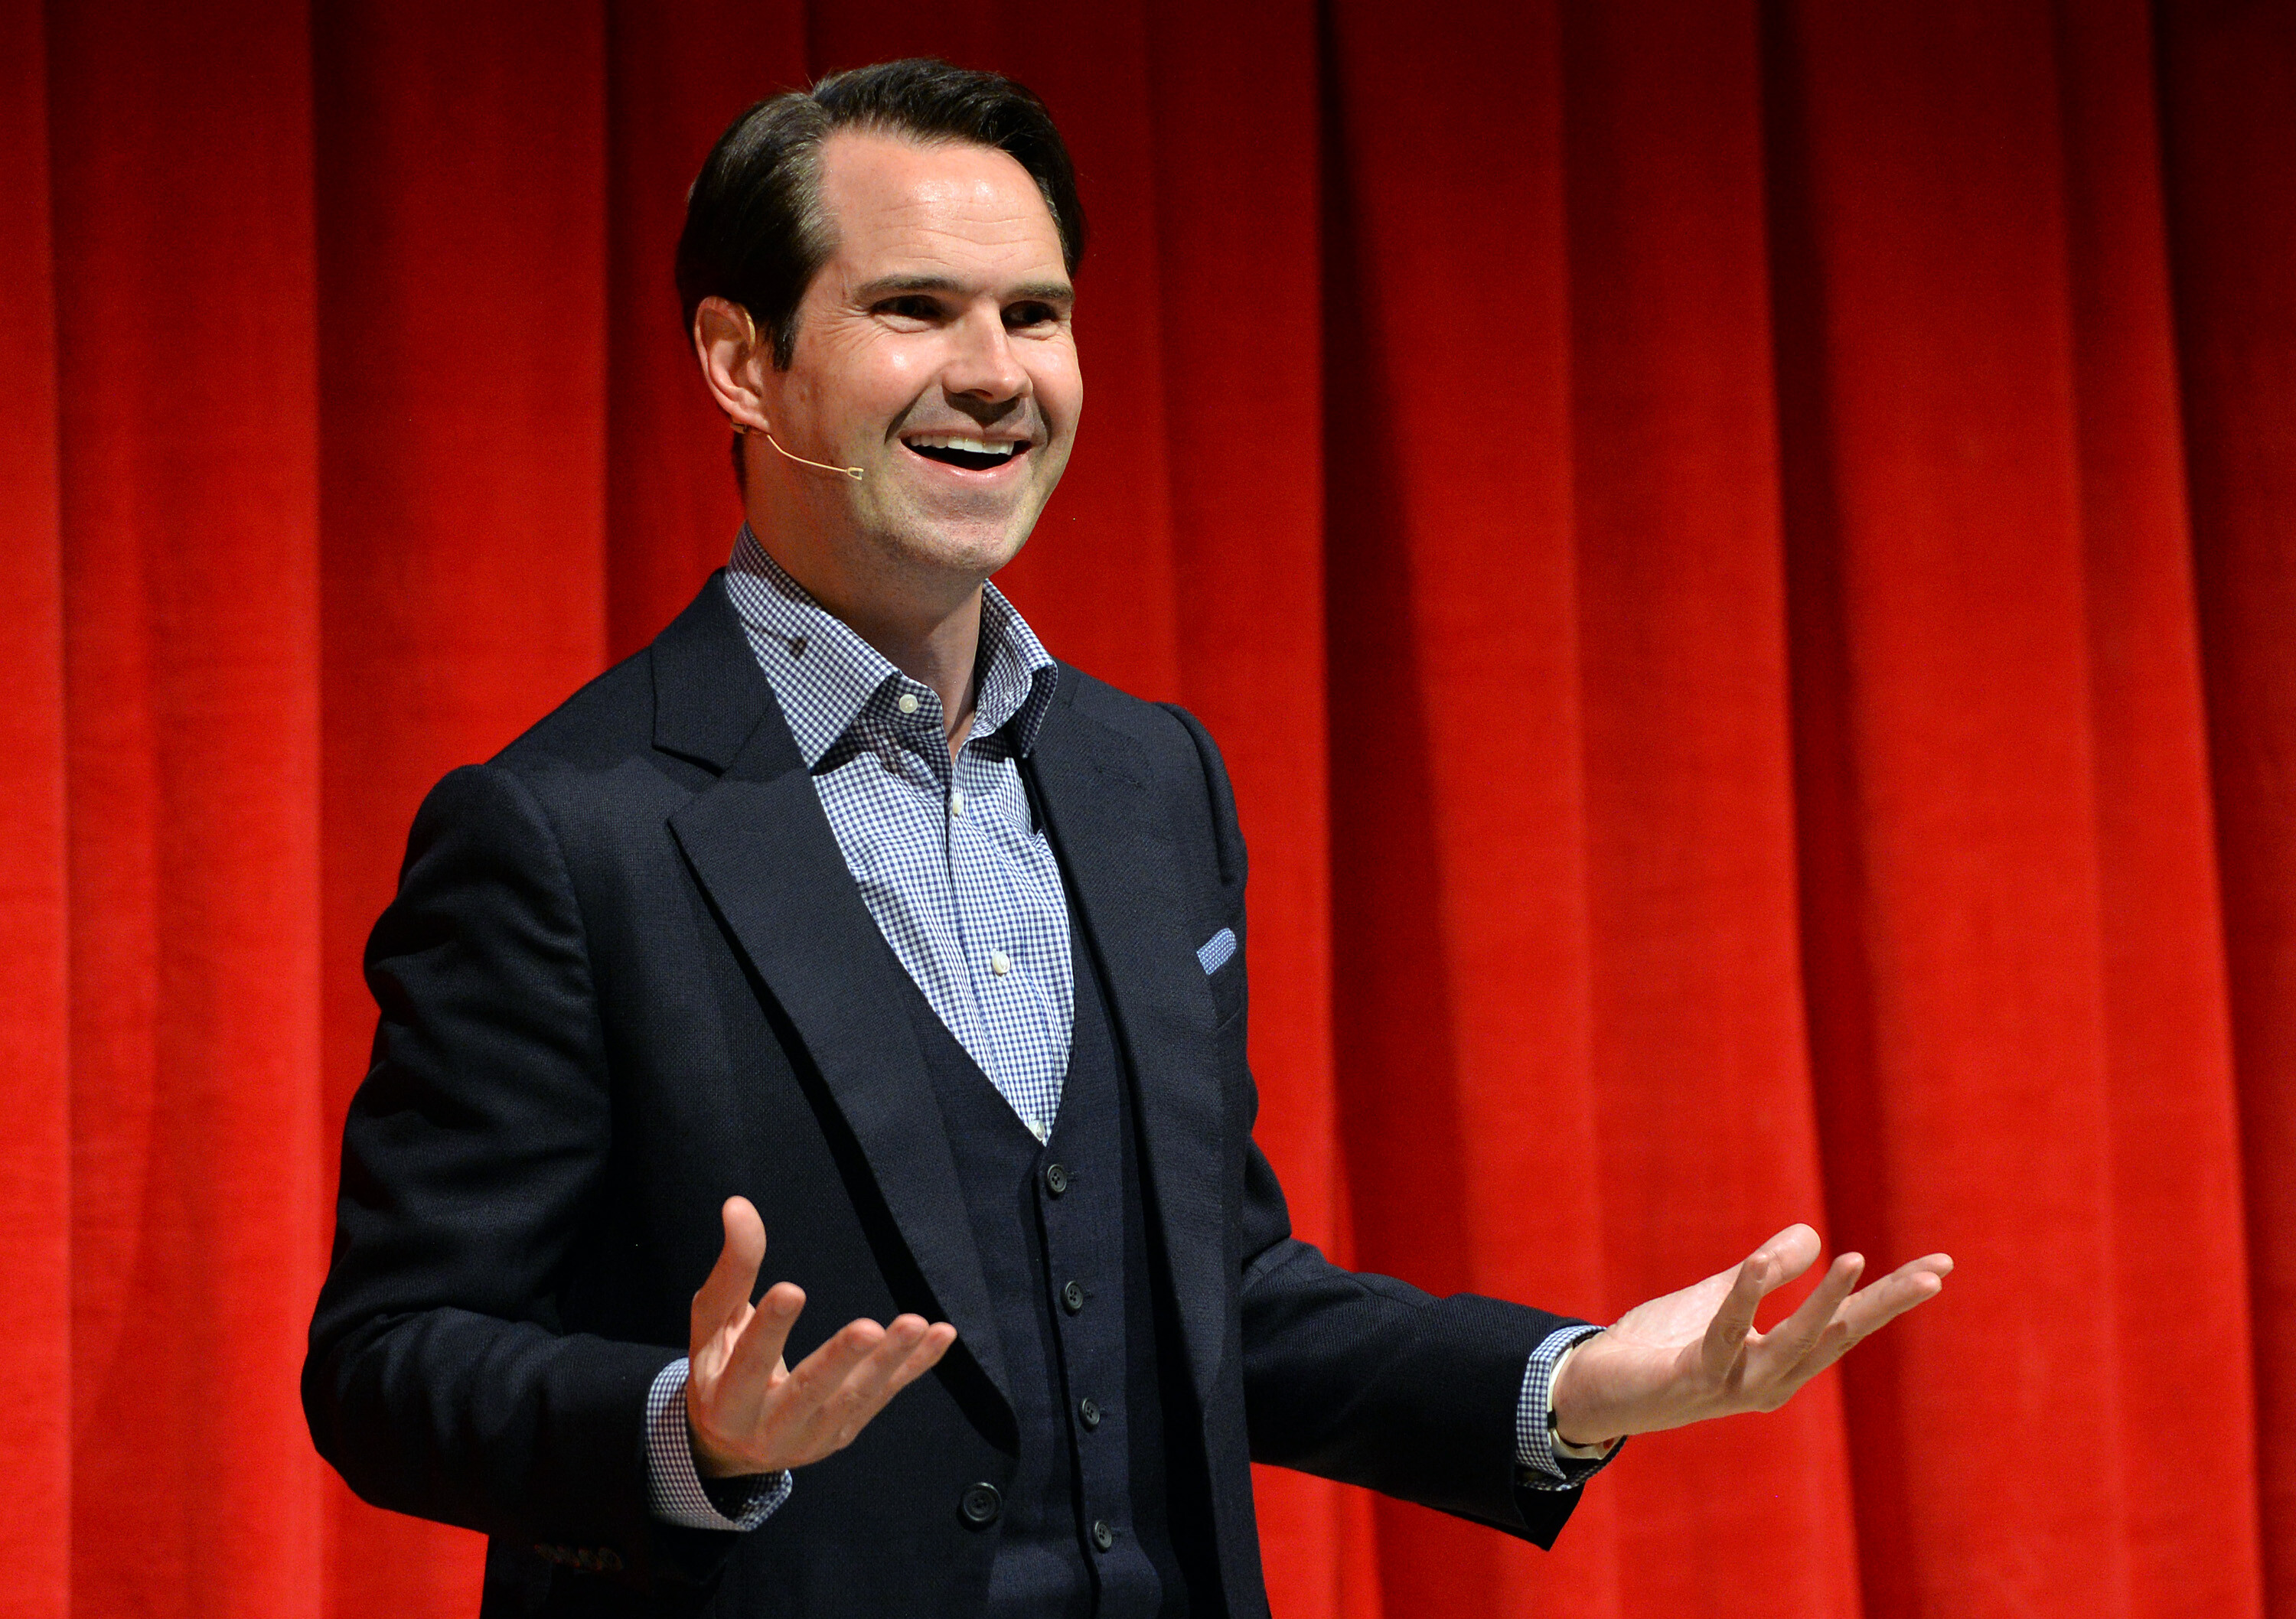 Jimmy Carr: A British-Irish comedian, presenter, writer, and actor, Comedy career since 1997, Channel 4 panel shows. 3000x2120 HD Background.